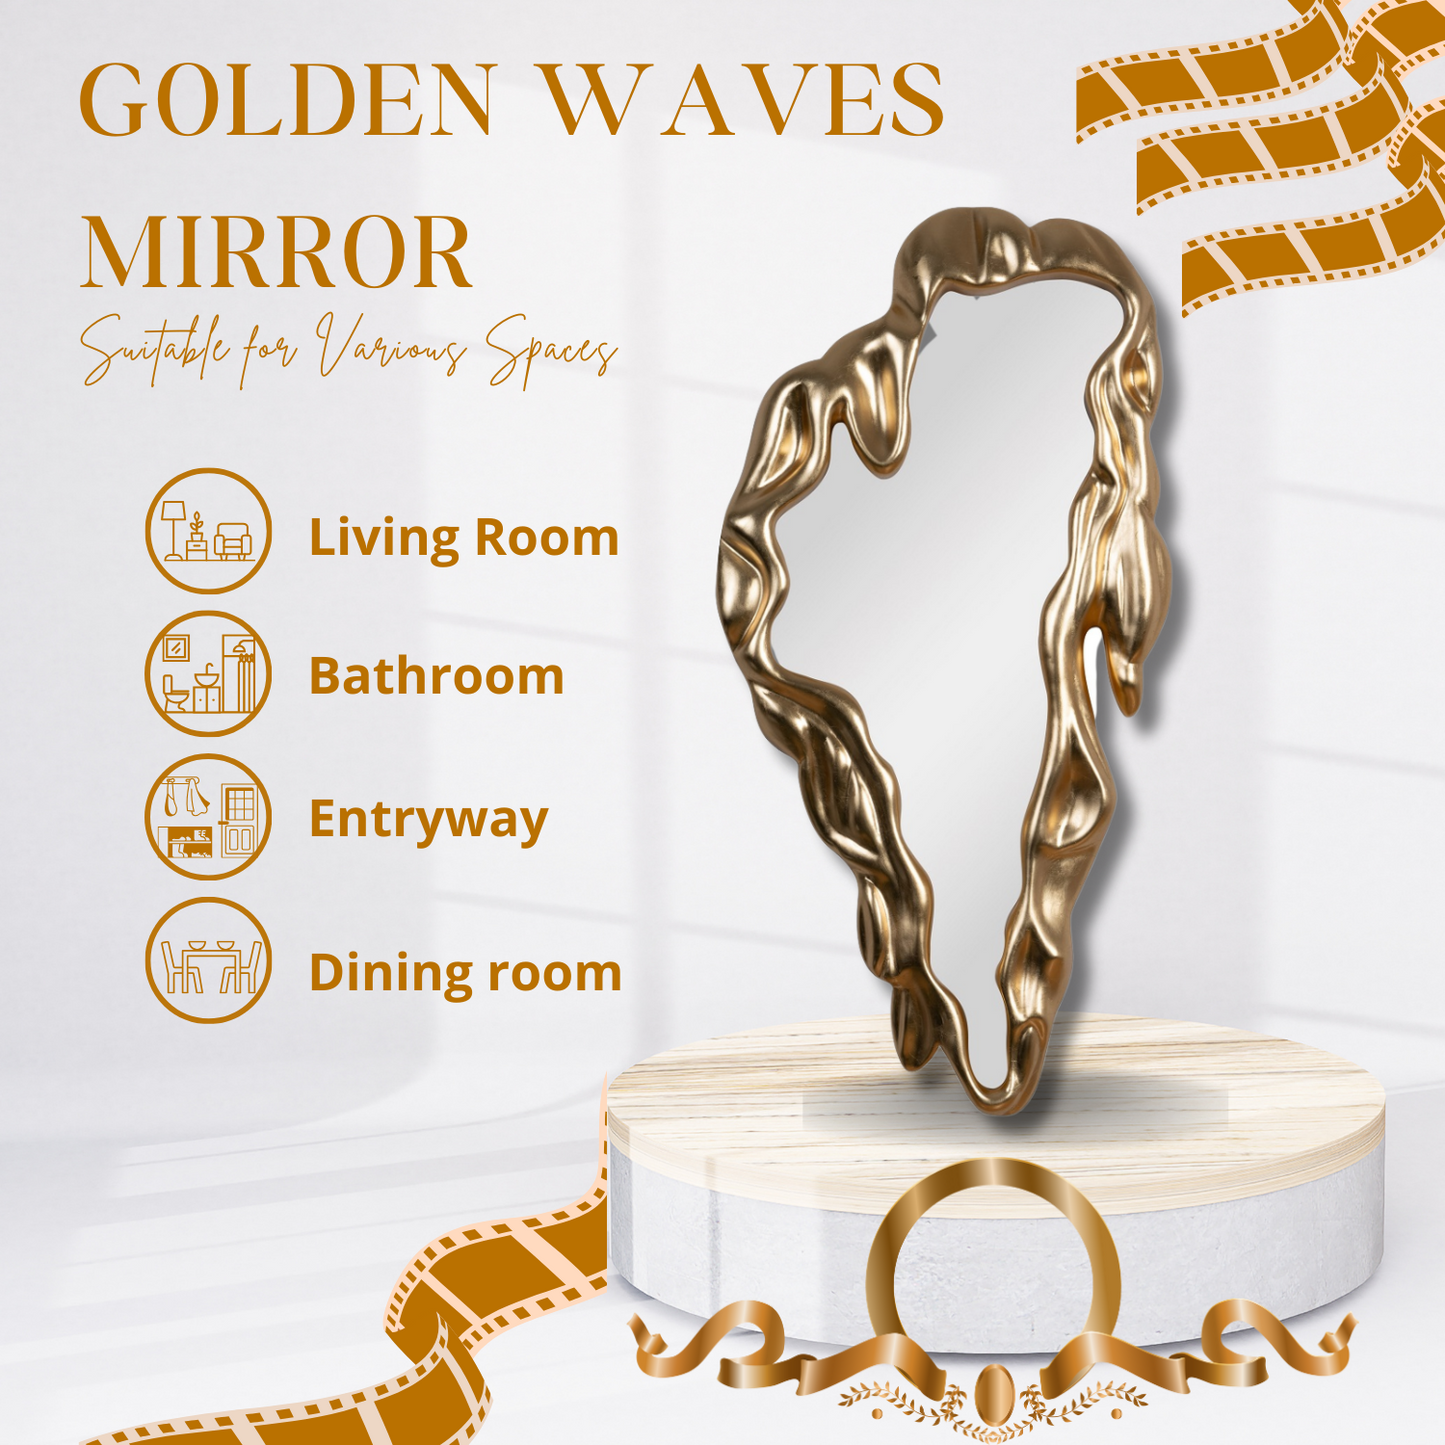 Golden Waves Reflection - Modern Wall Mirror with Elegant Wave Design for Contemporary Home Decor